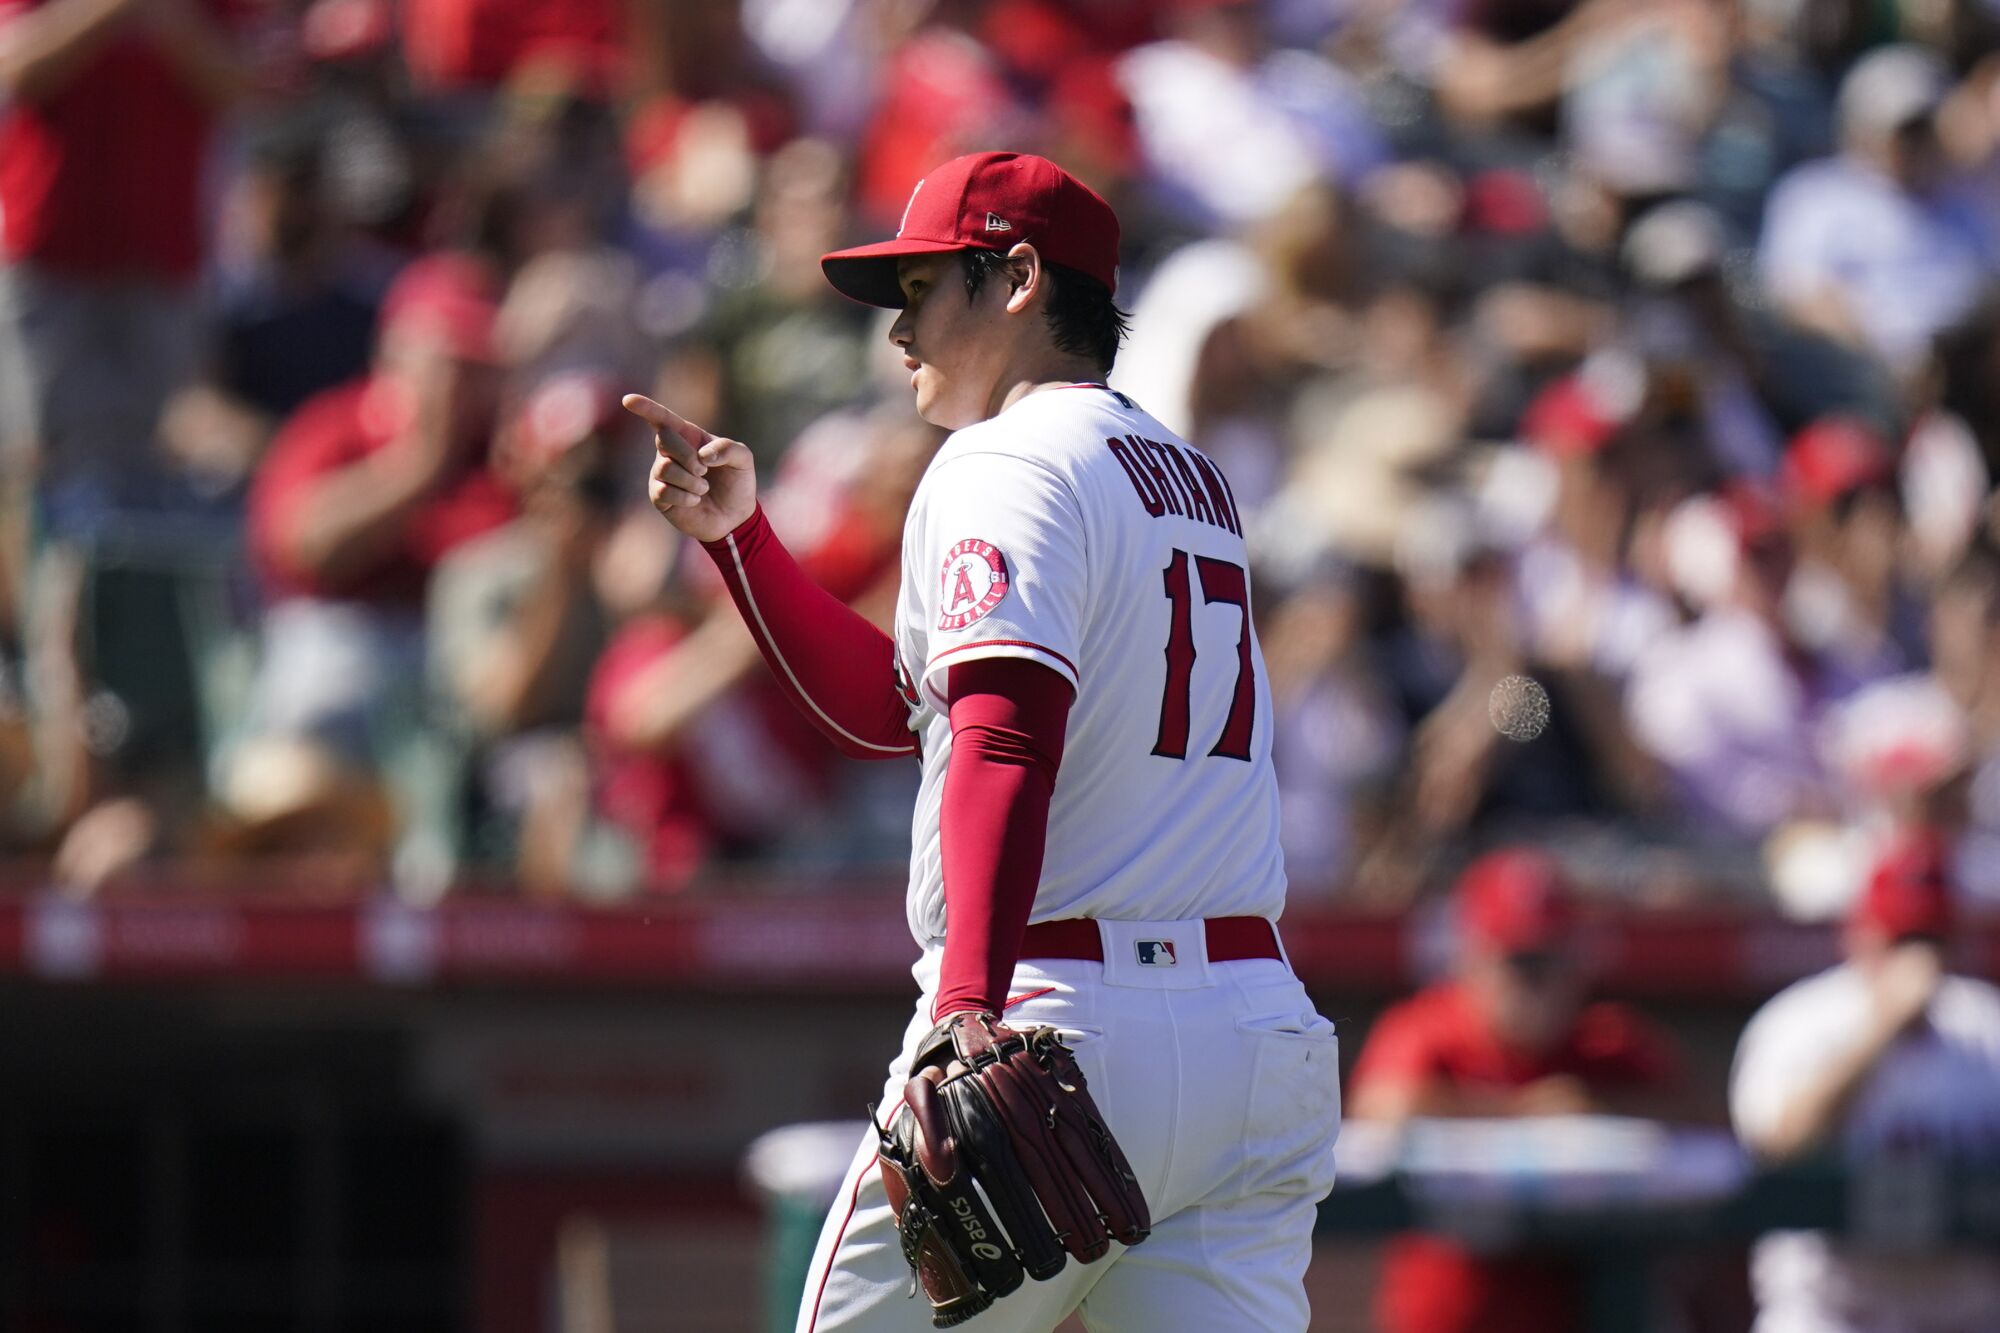 Angels starting pitcher Shohei Ohtani points to catcher Max Stassi.